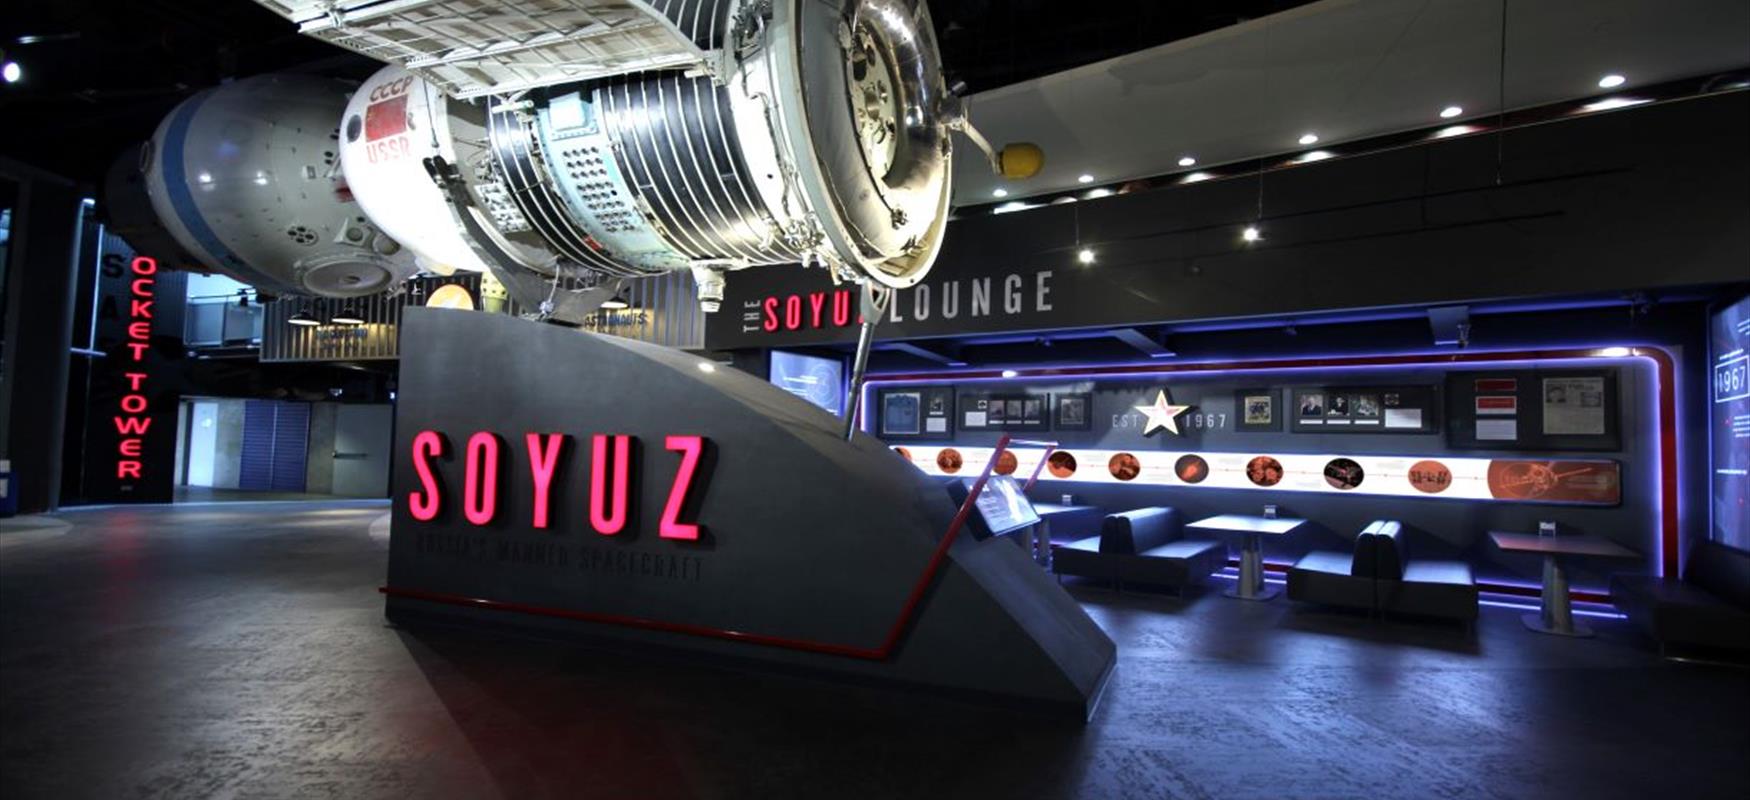 Soyuz Lounge at the National Space Centre in Leicester